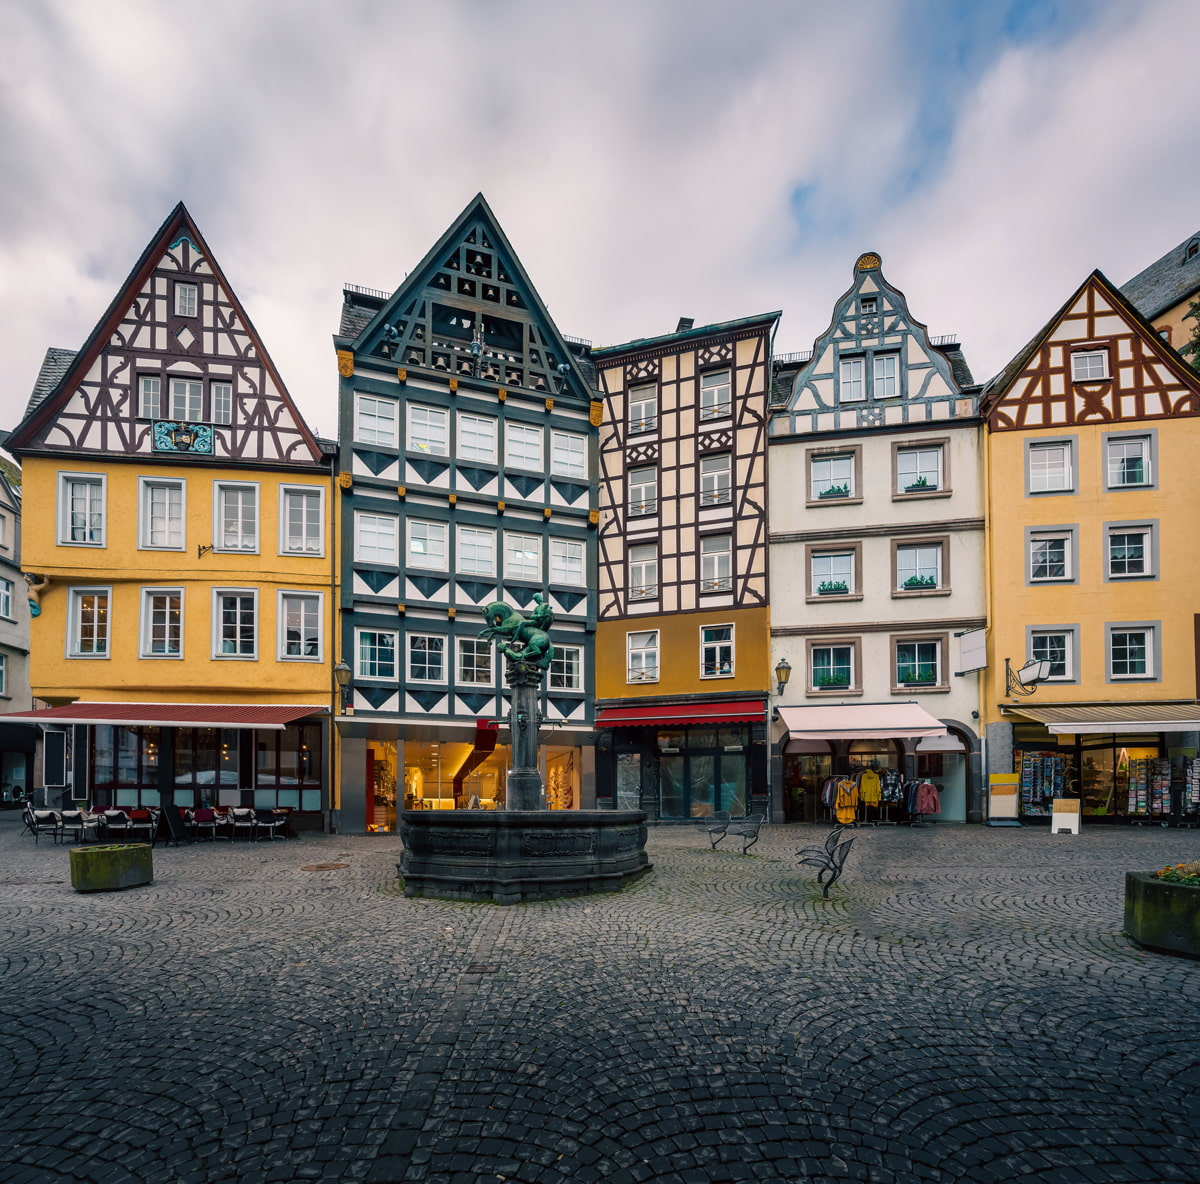 Storybook town in Germany